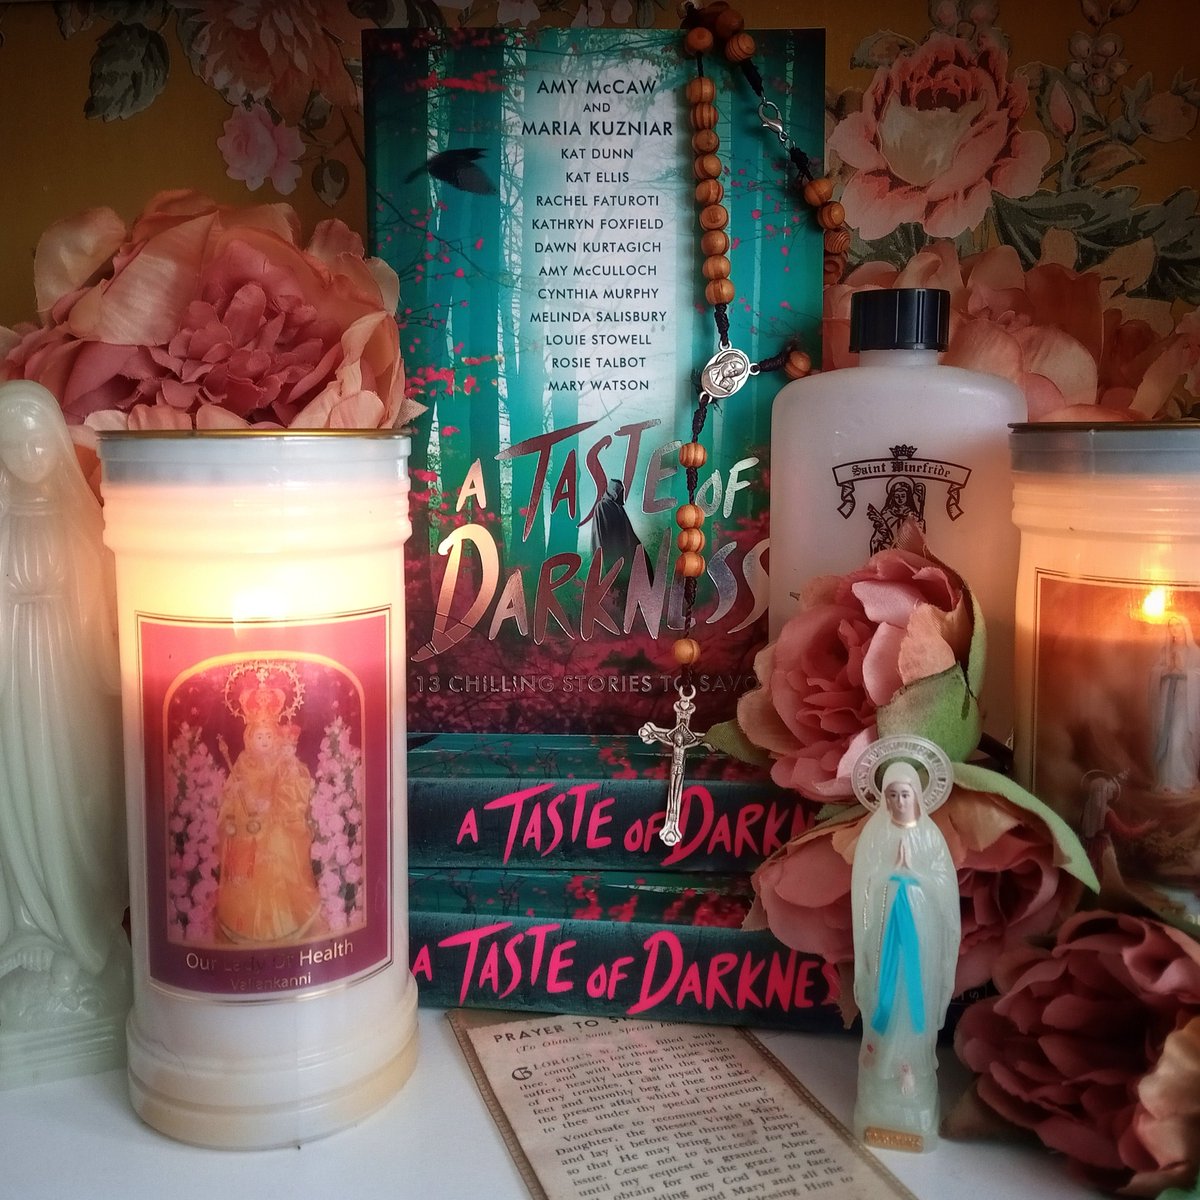 My author copies of A TASTE OF DARKNESS have arrived! My story, SAINT CLOVER, is a horrible little look at the power of chain letters and miracles; truly the most disturbing thing I've written so far. And I'll be at the launch next month in London. Link to tickets in my bio 🌺